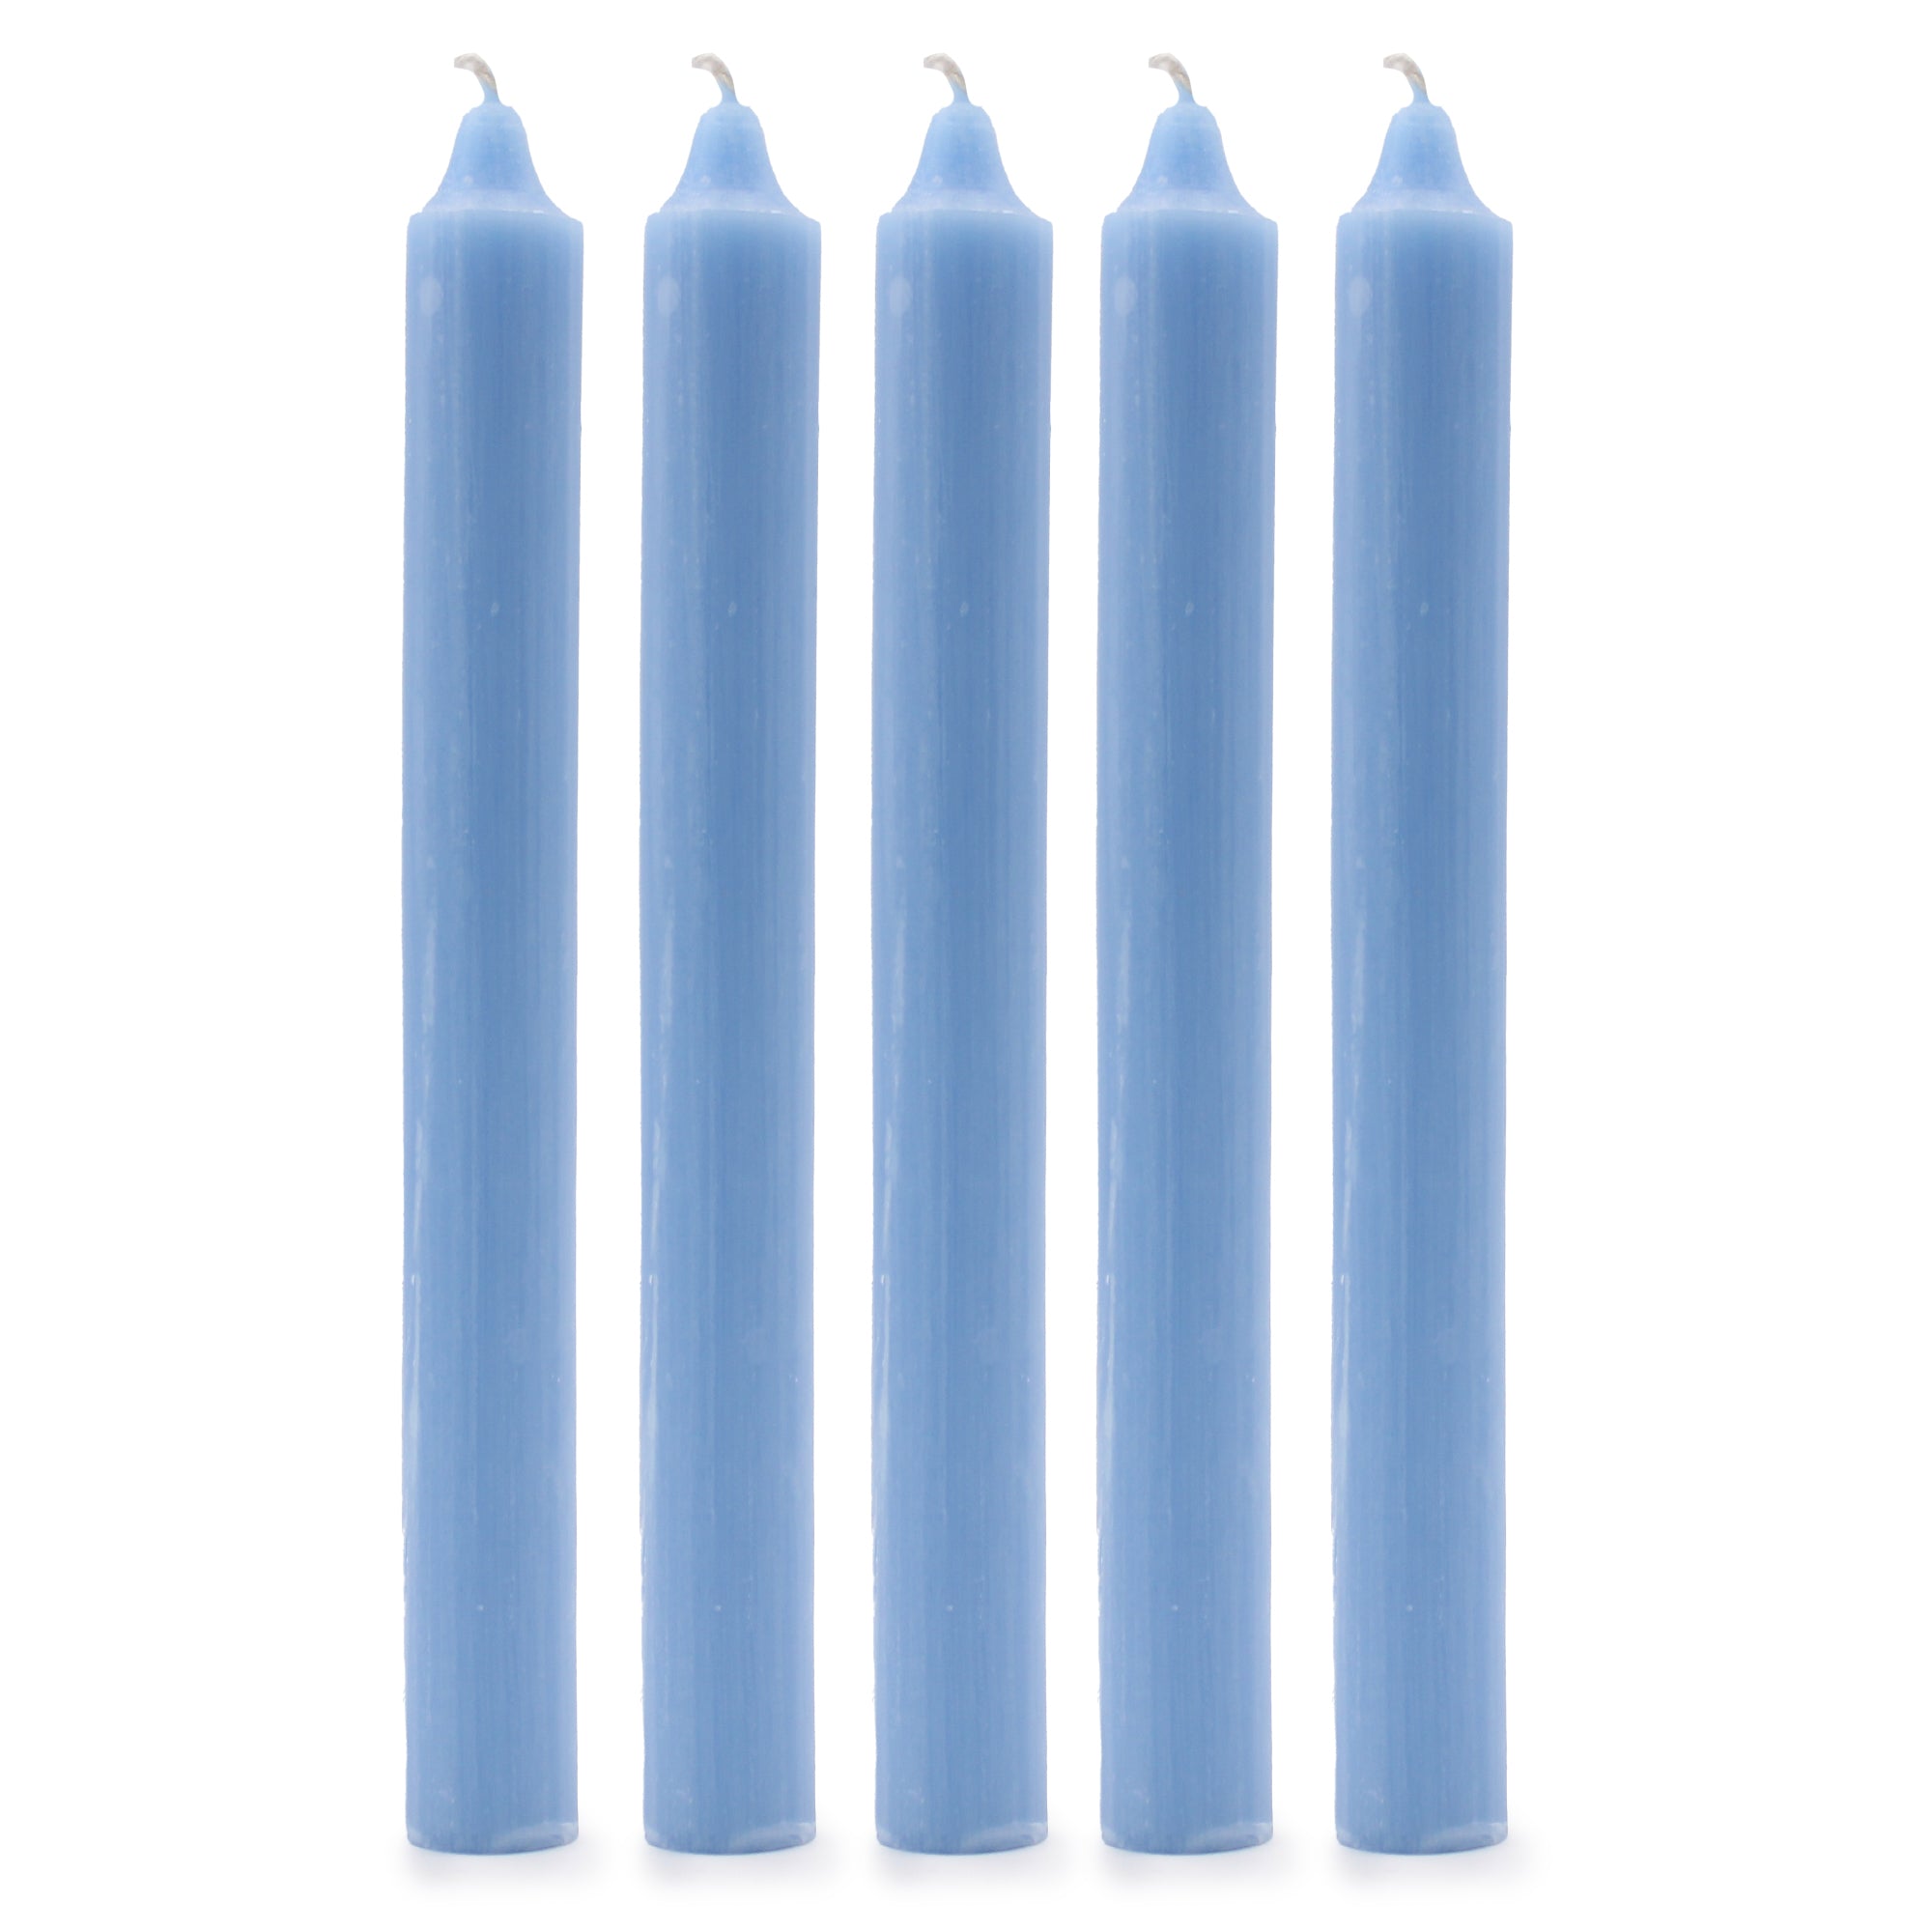 View Solid Colour Dinner Candles Rustic Sea Blue Pack of 5 information